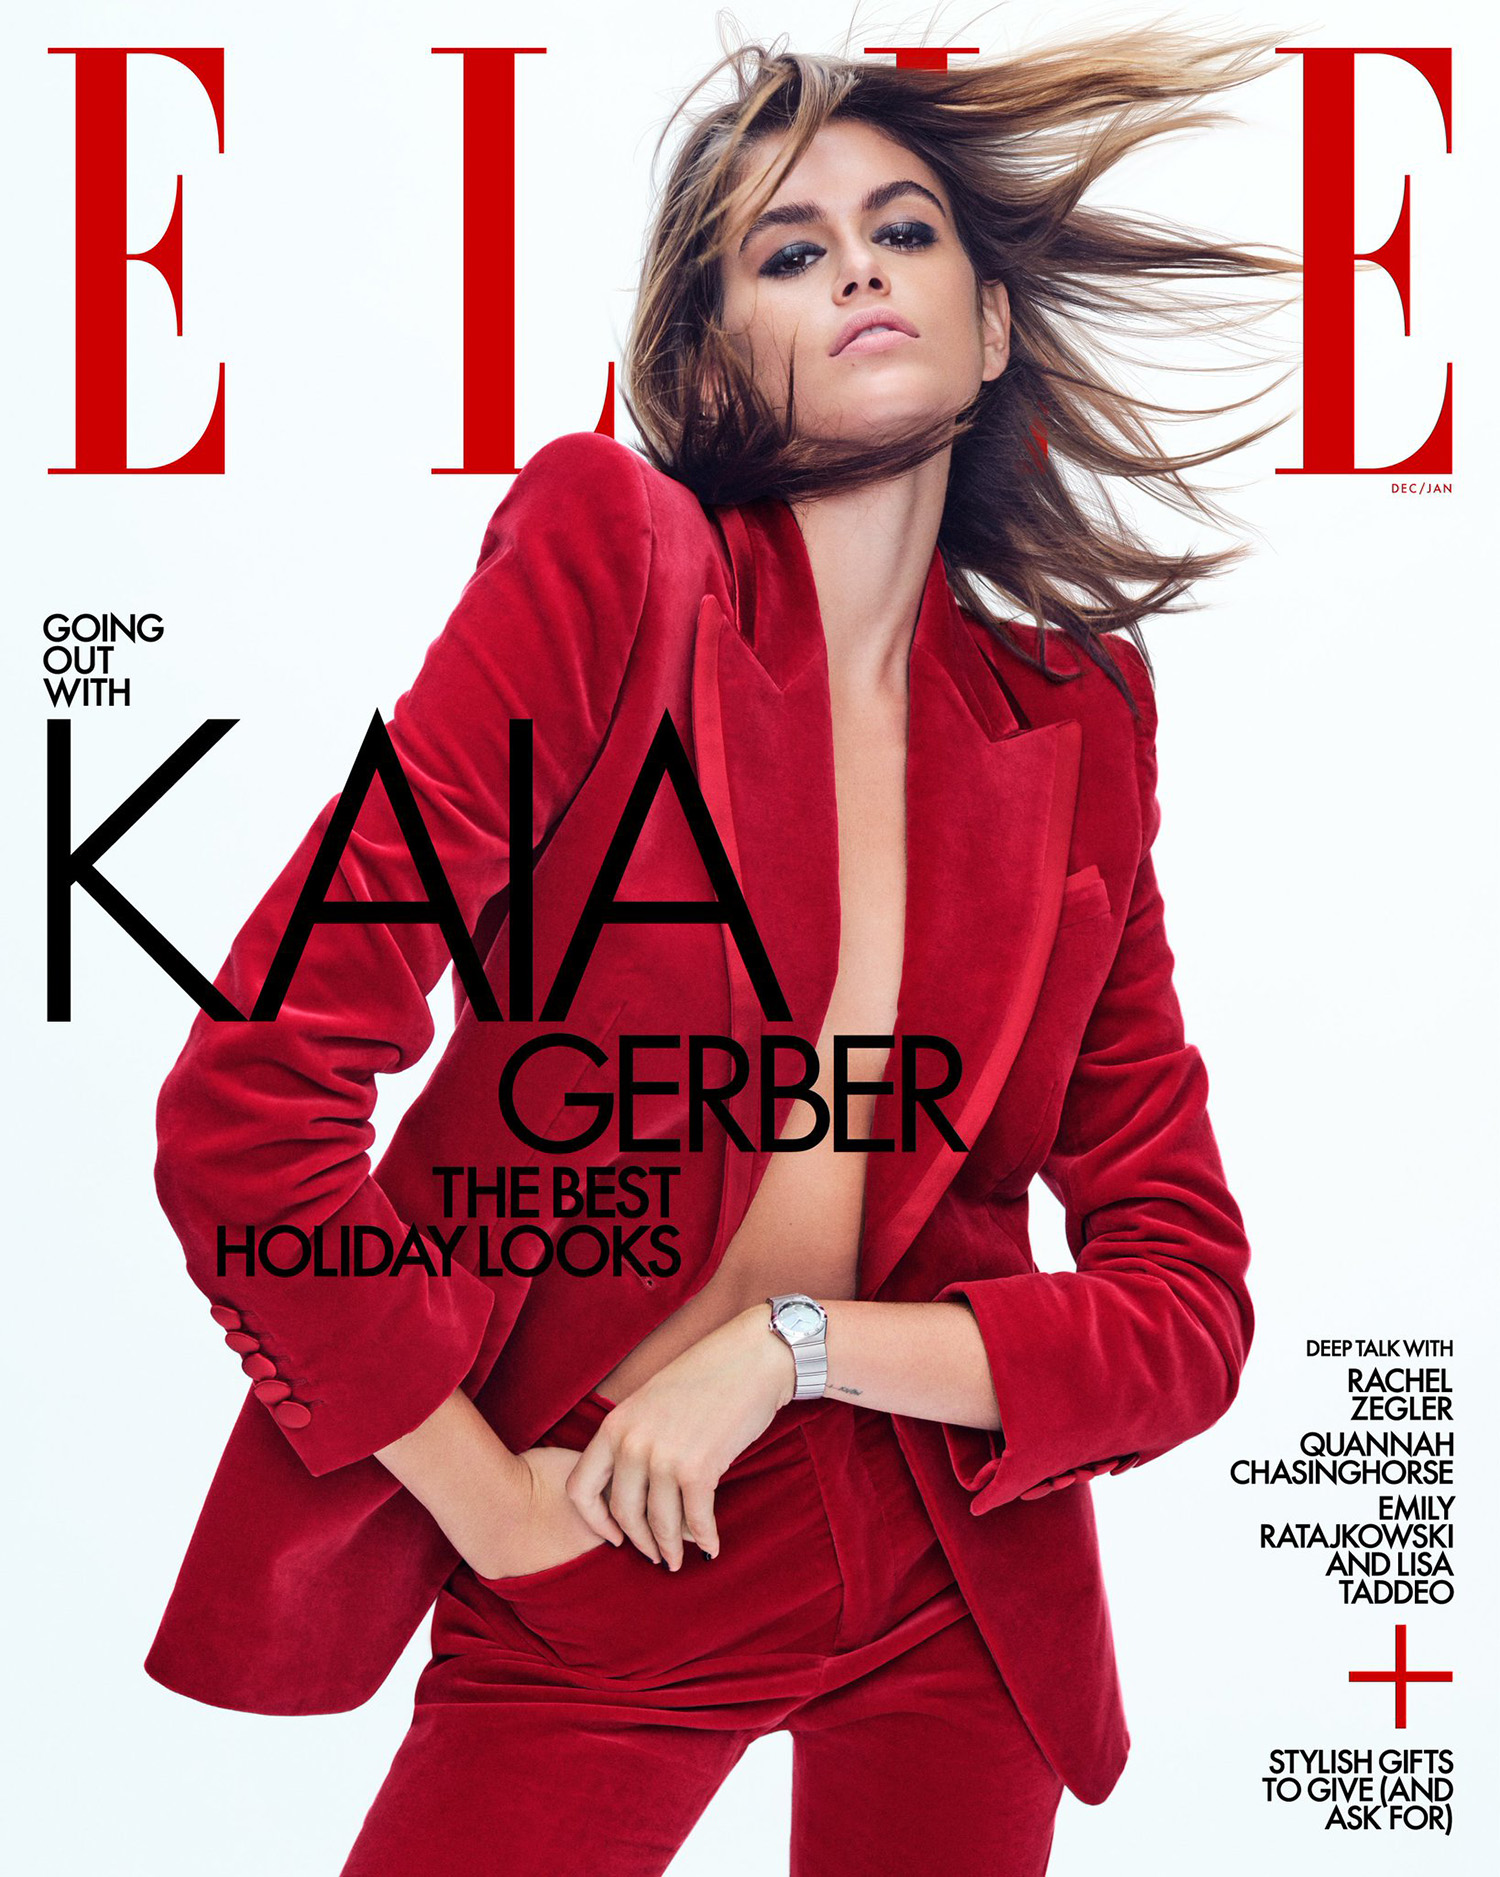 Kaia Gerber covers Elle US December 2021 January 2022 by Nathaniel Goldberg